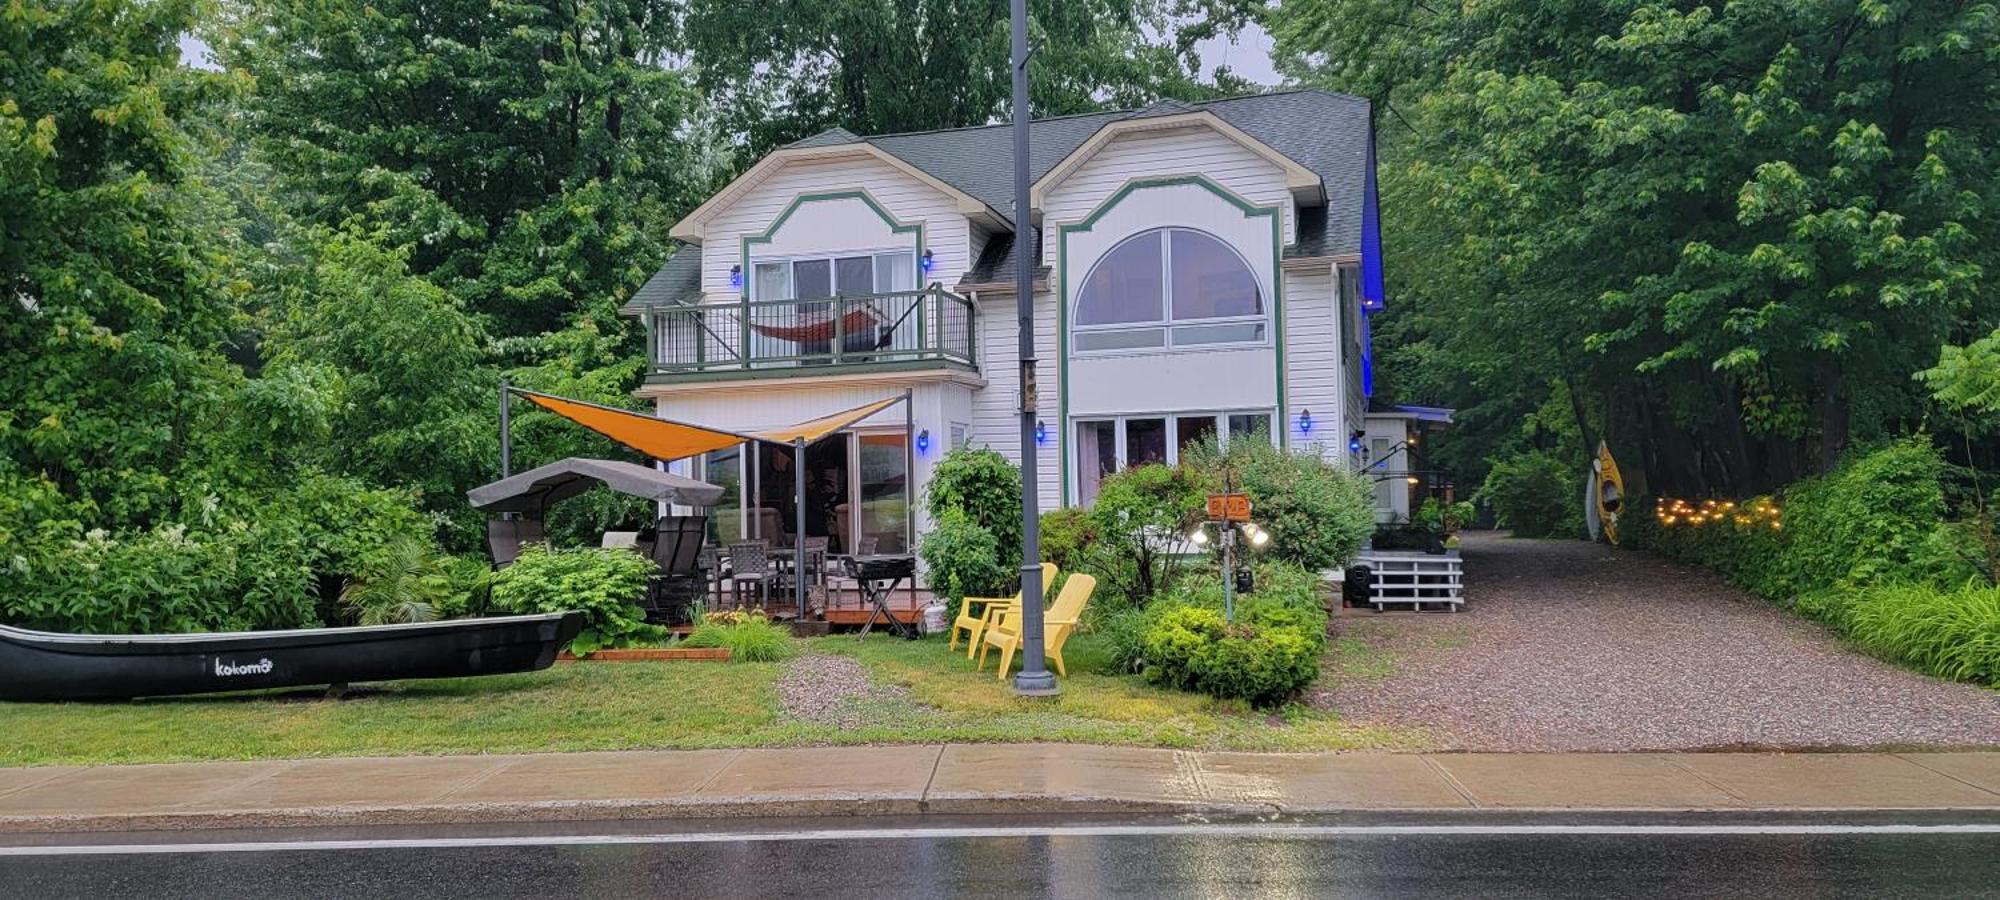 Kokomo Inn Bed And Breakfast Ottawa-Gatineau'S Only Tropical Riverfront B&B On The National Capital Cycling Pathway Route Verte #1 - For Adults Only - Chambre D'Hotes Tropical Aux Berges Des Outaouais Bnb #17542O Экстерьер фото